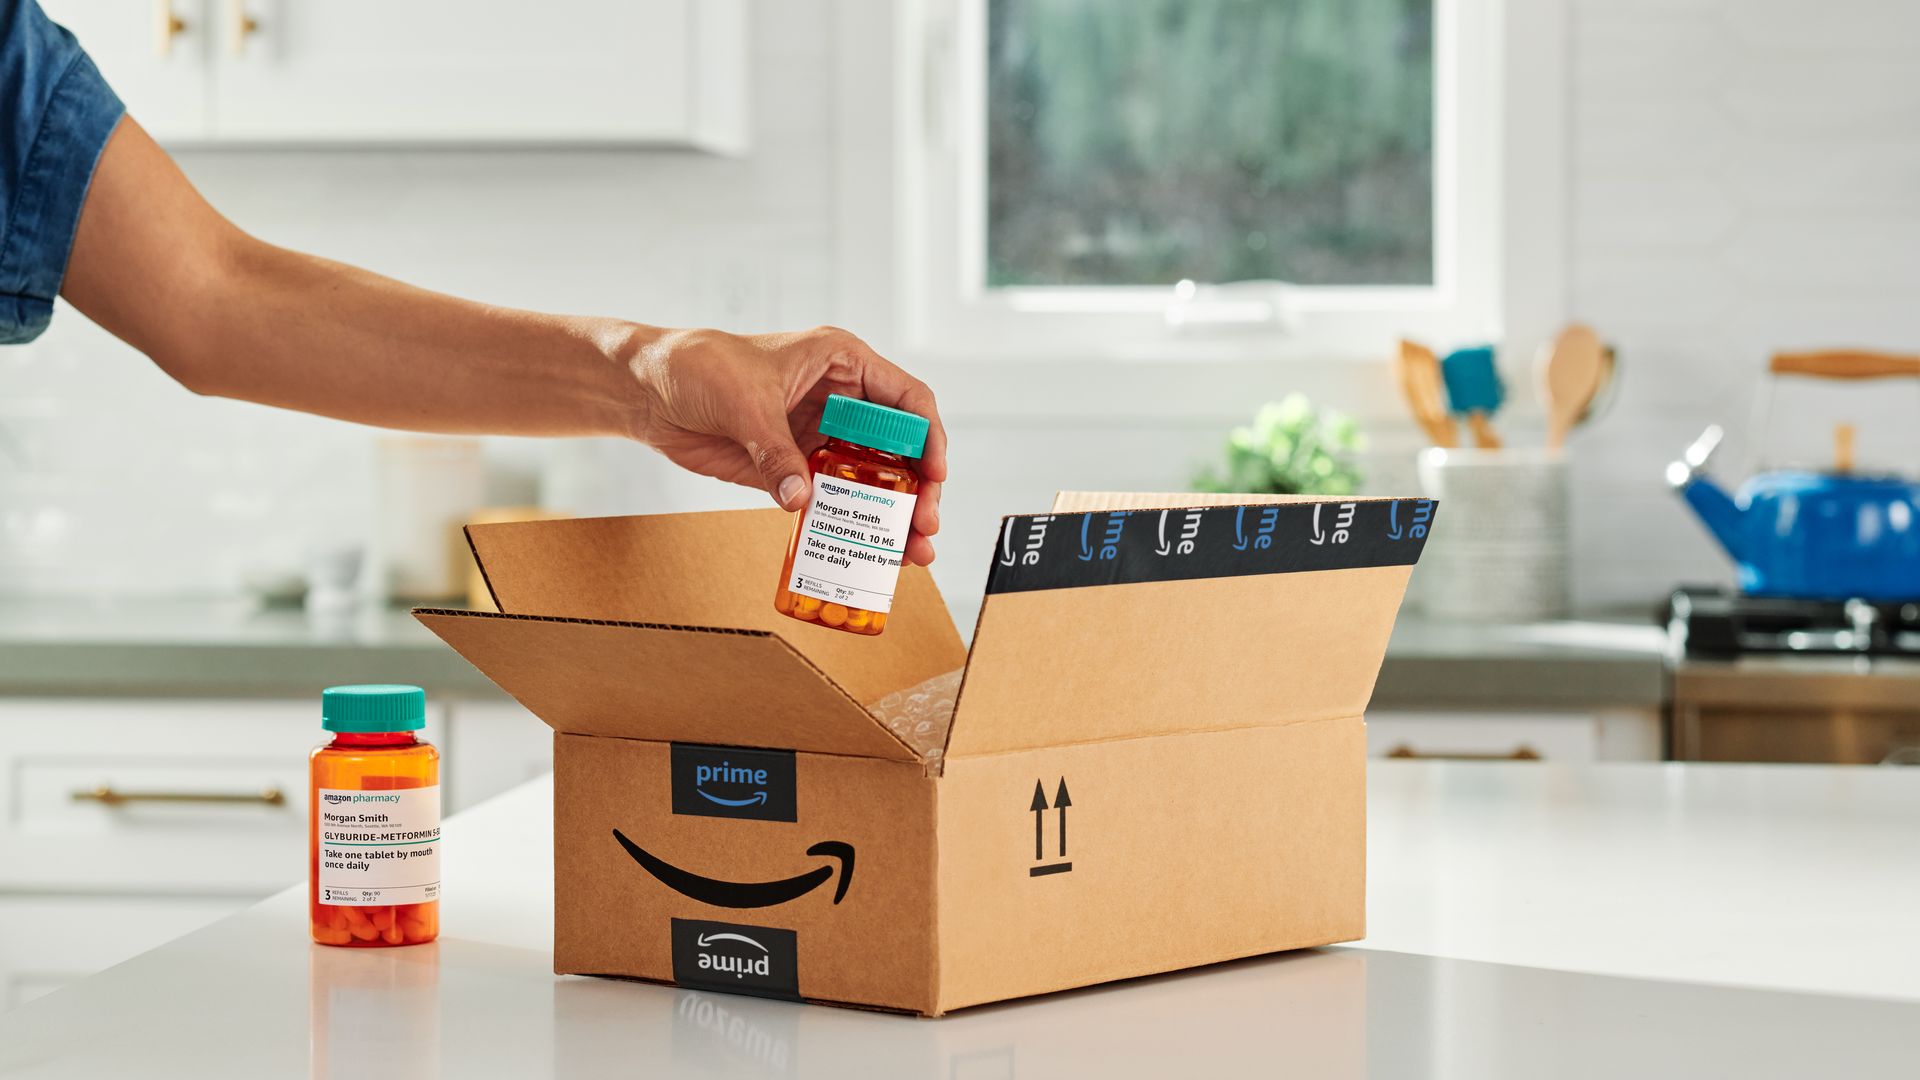 Hand reaching into Amazon box taking out pill bottle with another prescription bottle to left of box